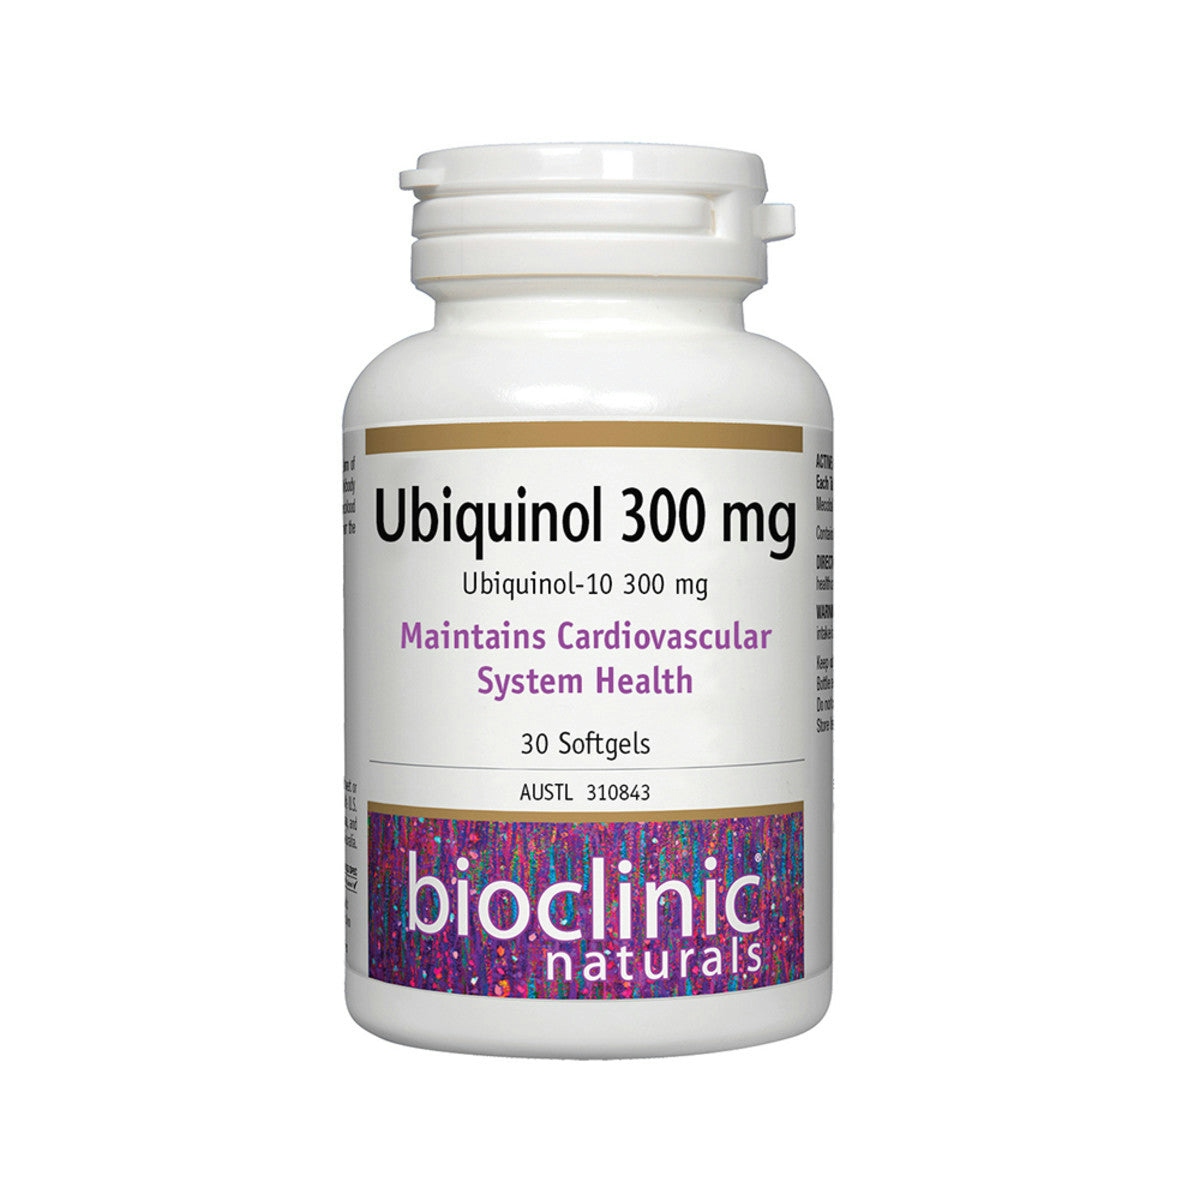 Image of Bioclinic Naturals Ubiquinol 300mg 30c with a white background